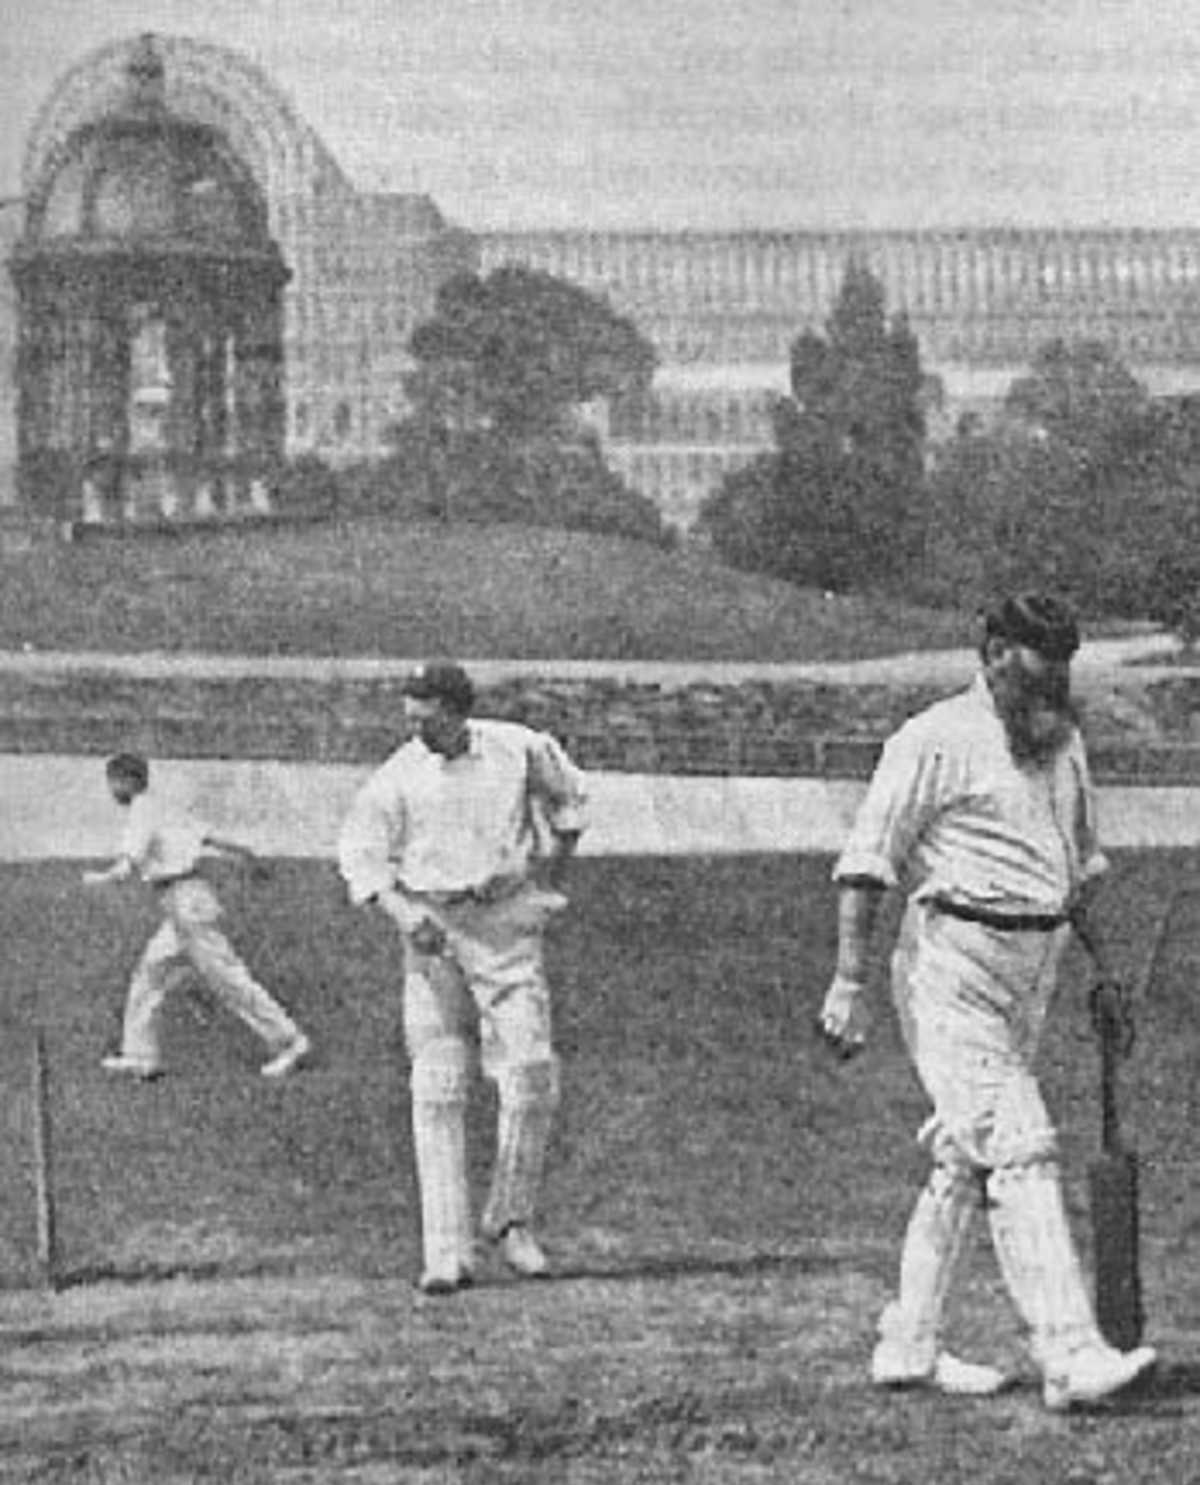 W G Grace finishes a practice session at London County's Crystal Palace ground